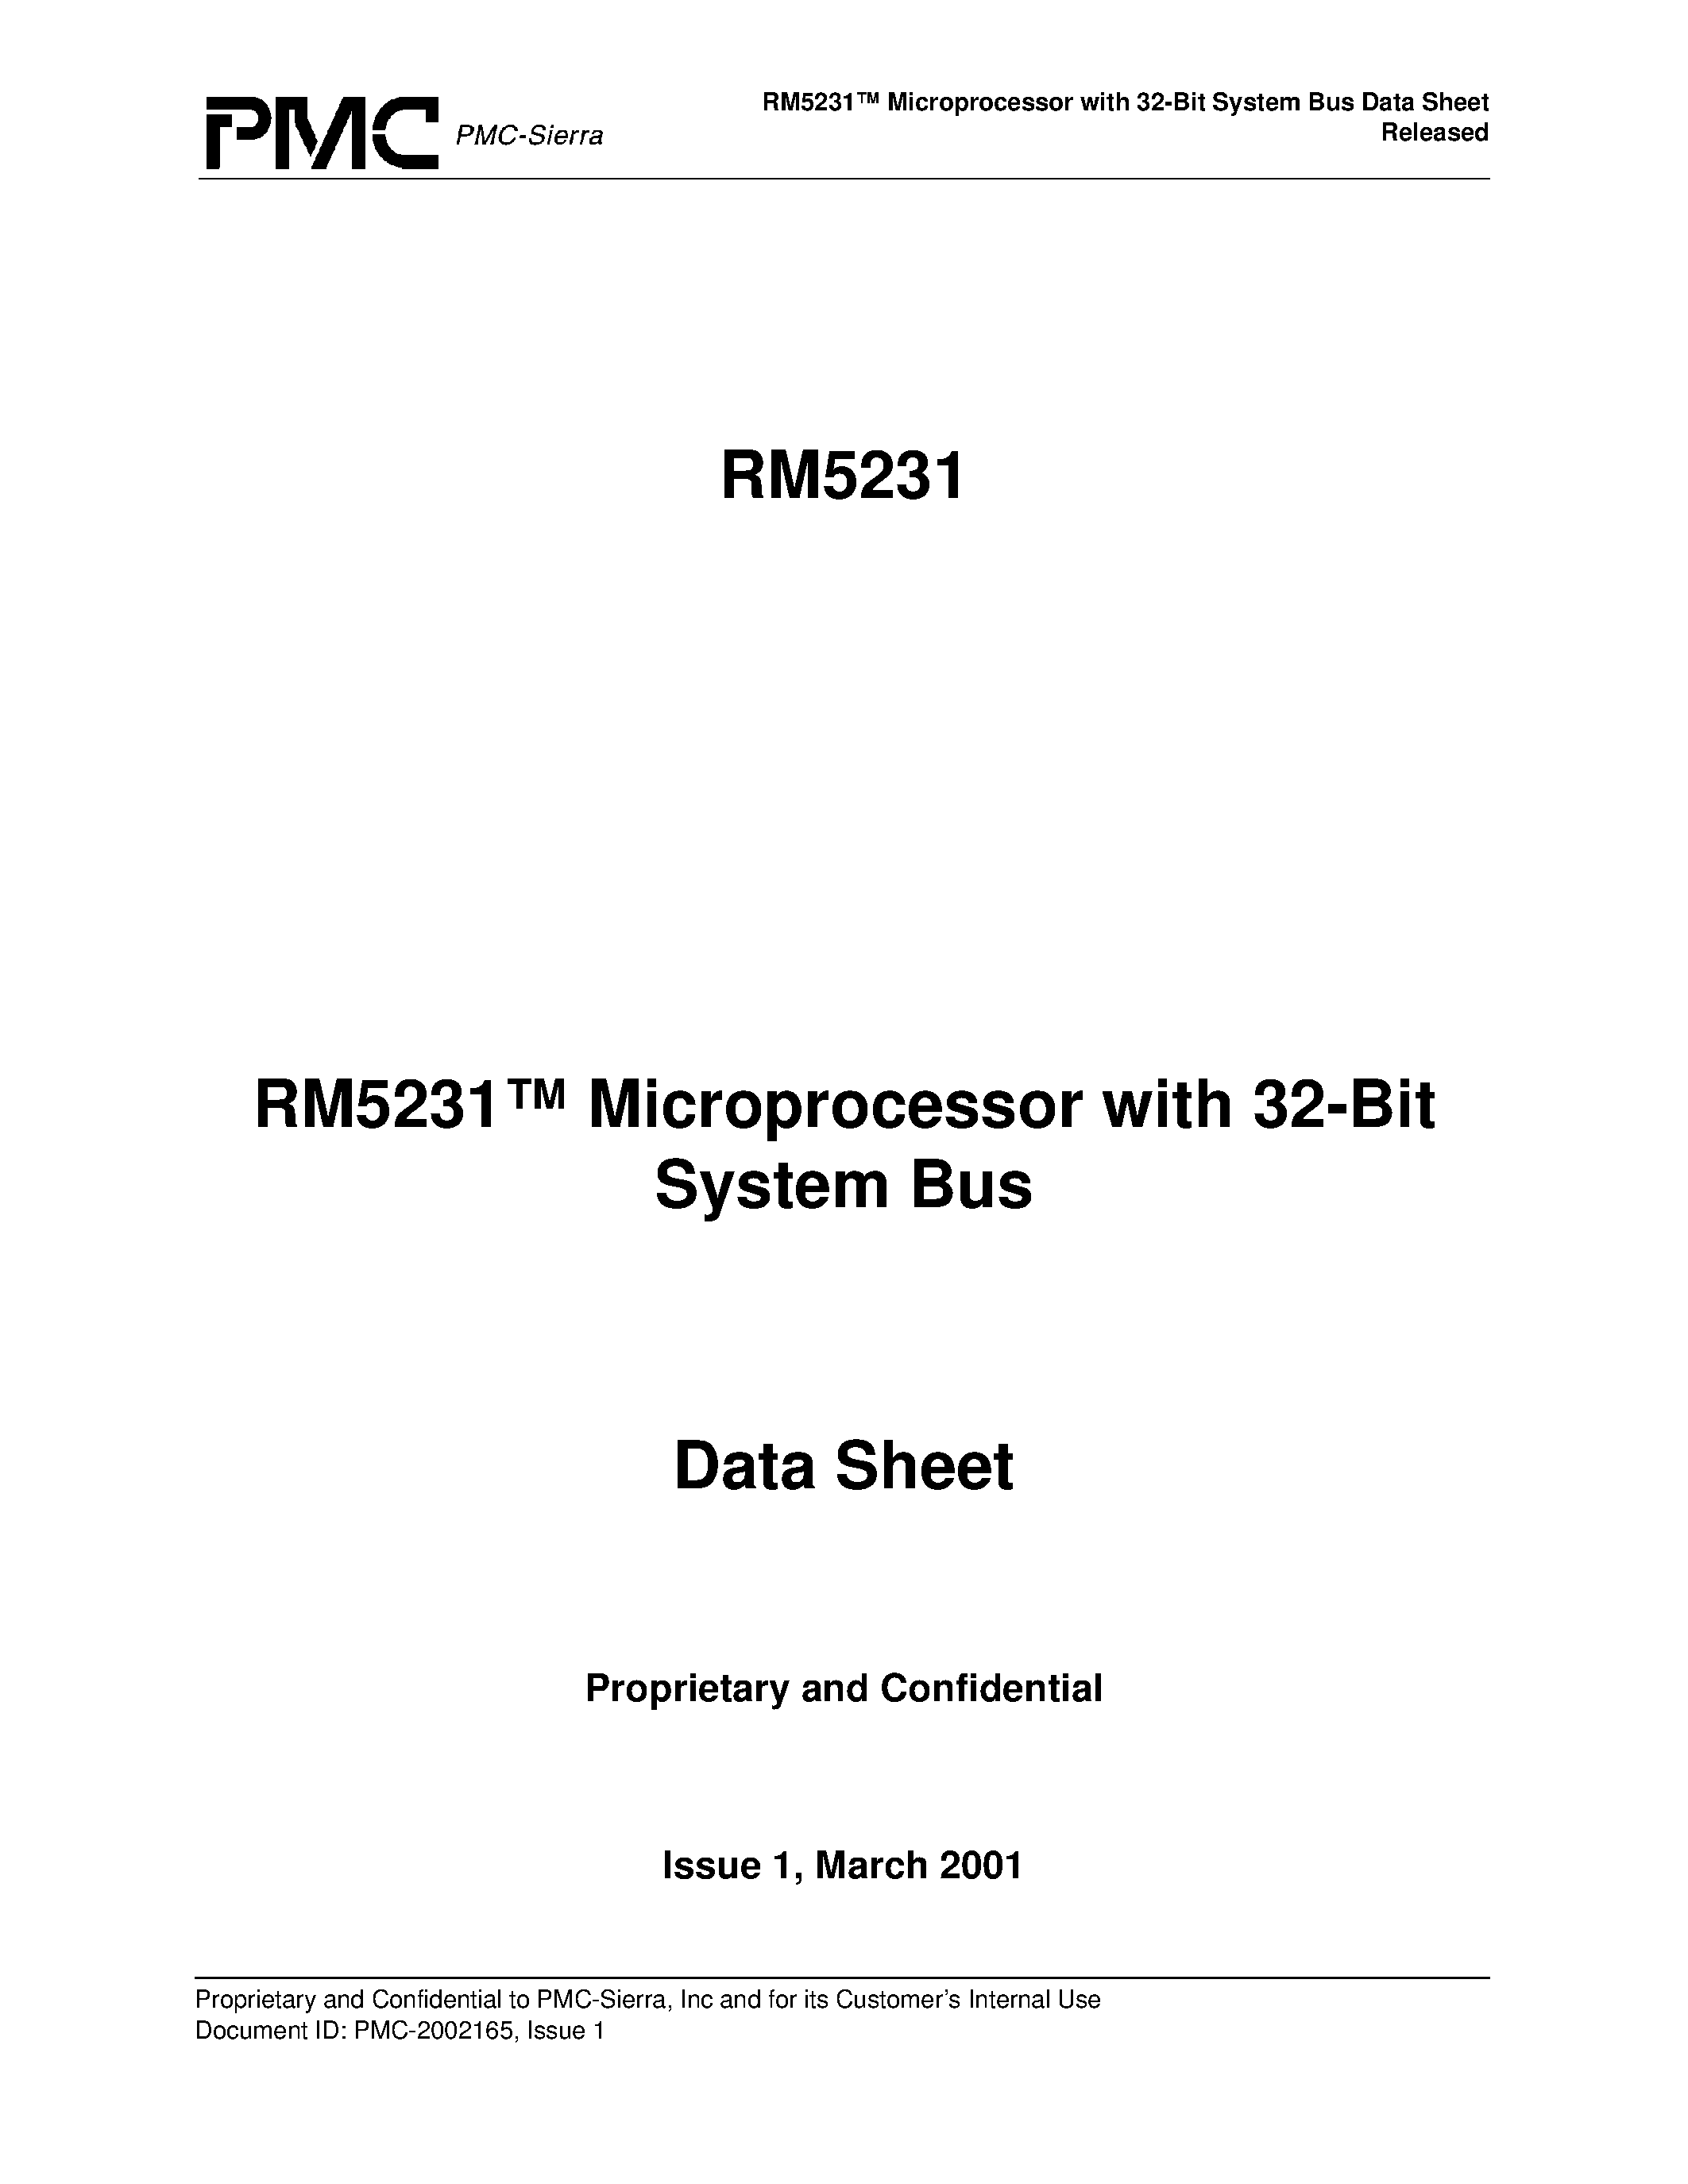 Datasheet RM5231-250-Q - RM5231 Microprocessor with 32-Bit System Bus Data Sheet Released page 1